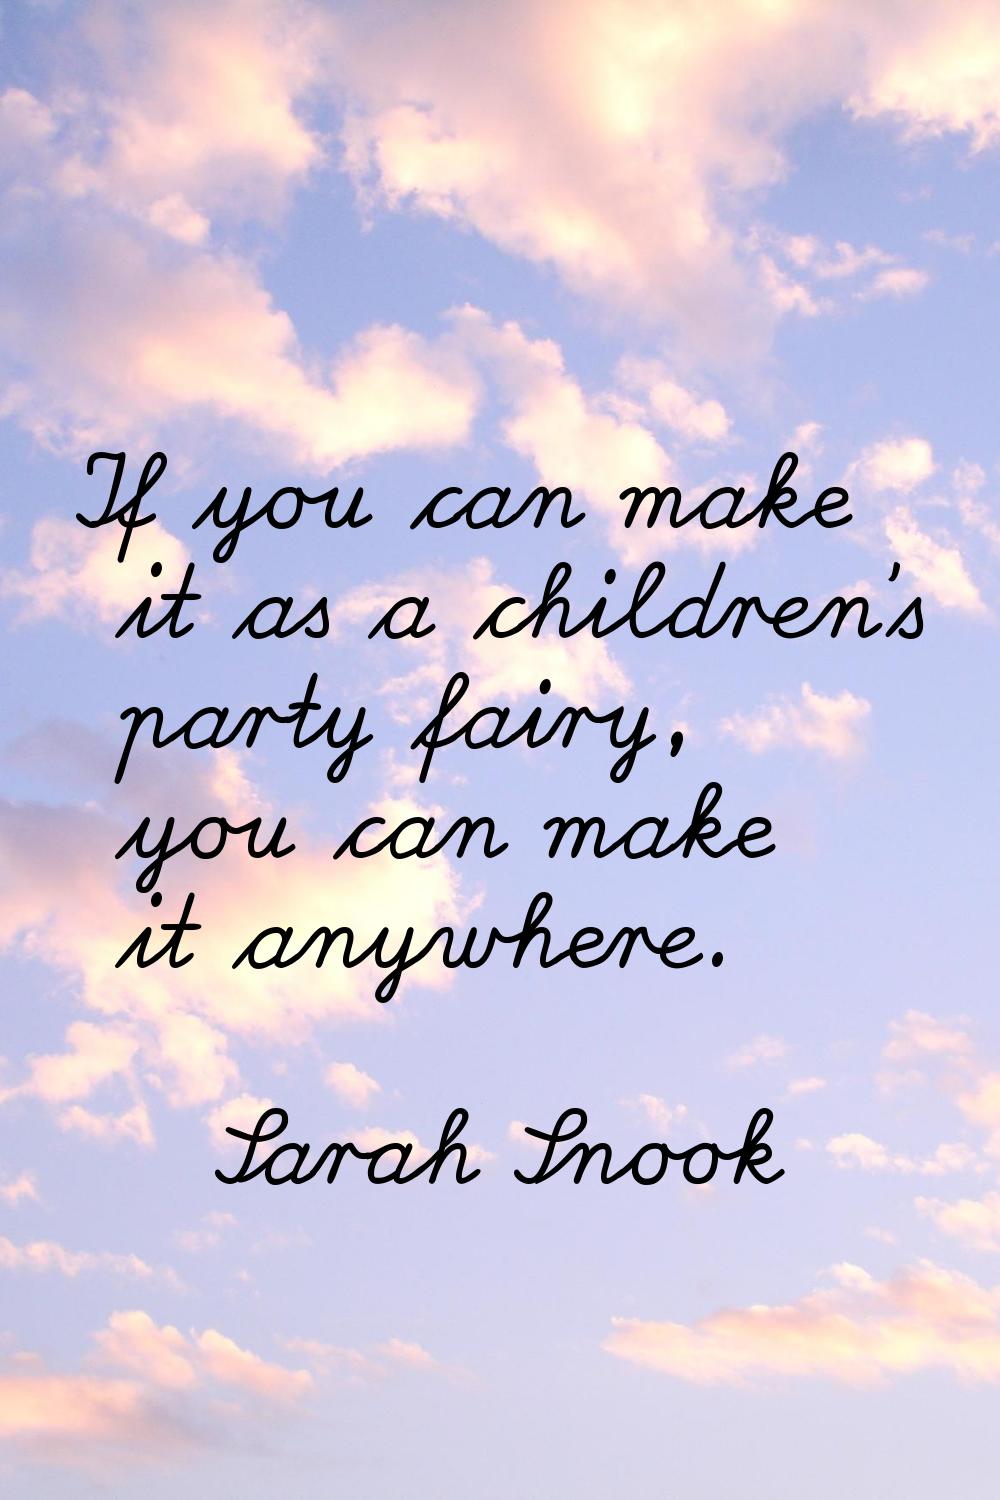 If you can make it as a children's party fairy, you can make it anywhere.